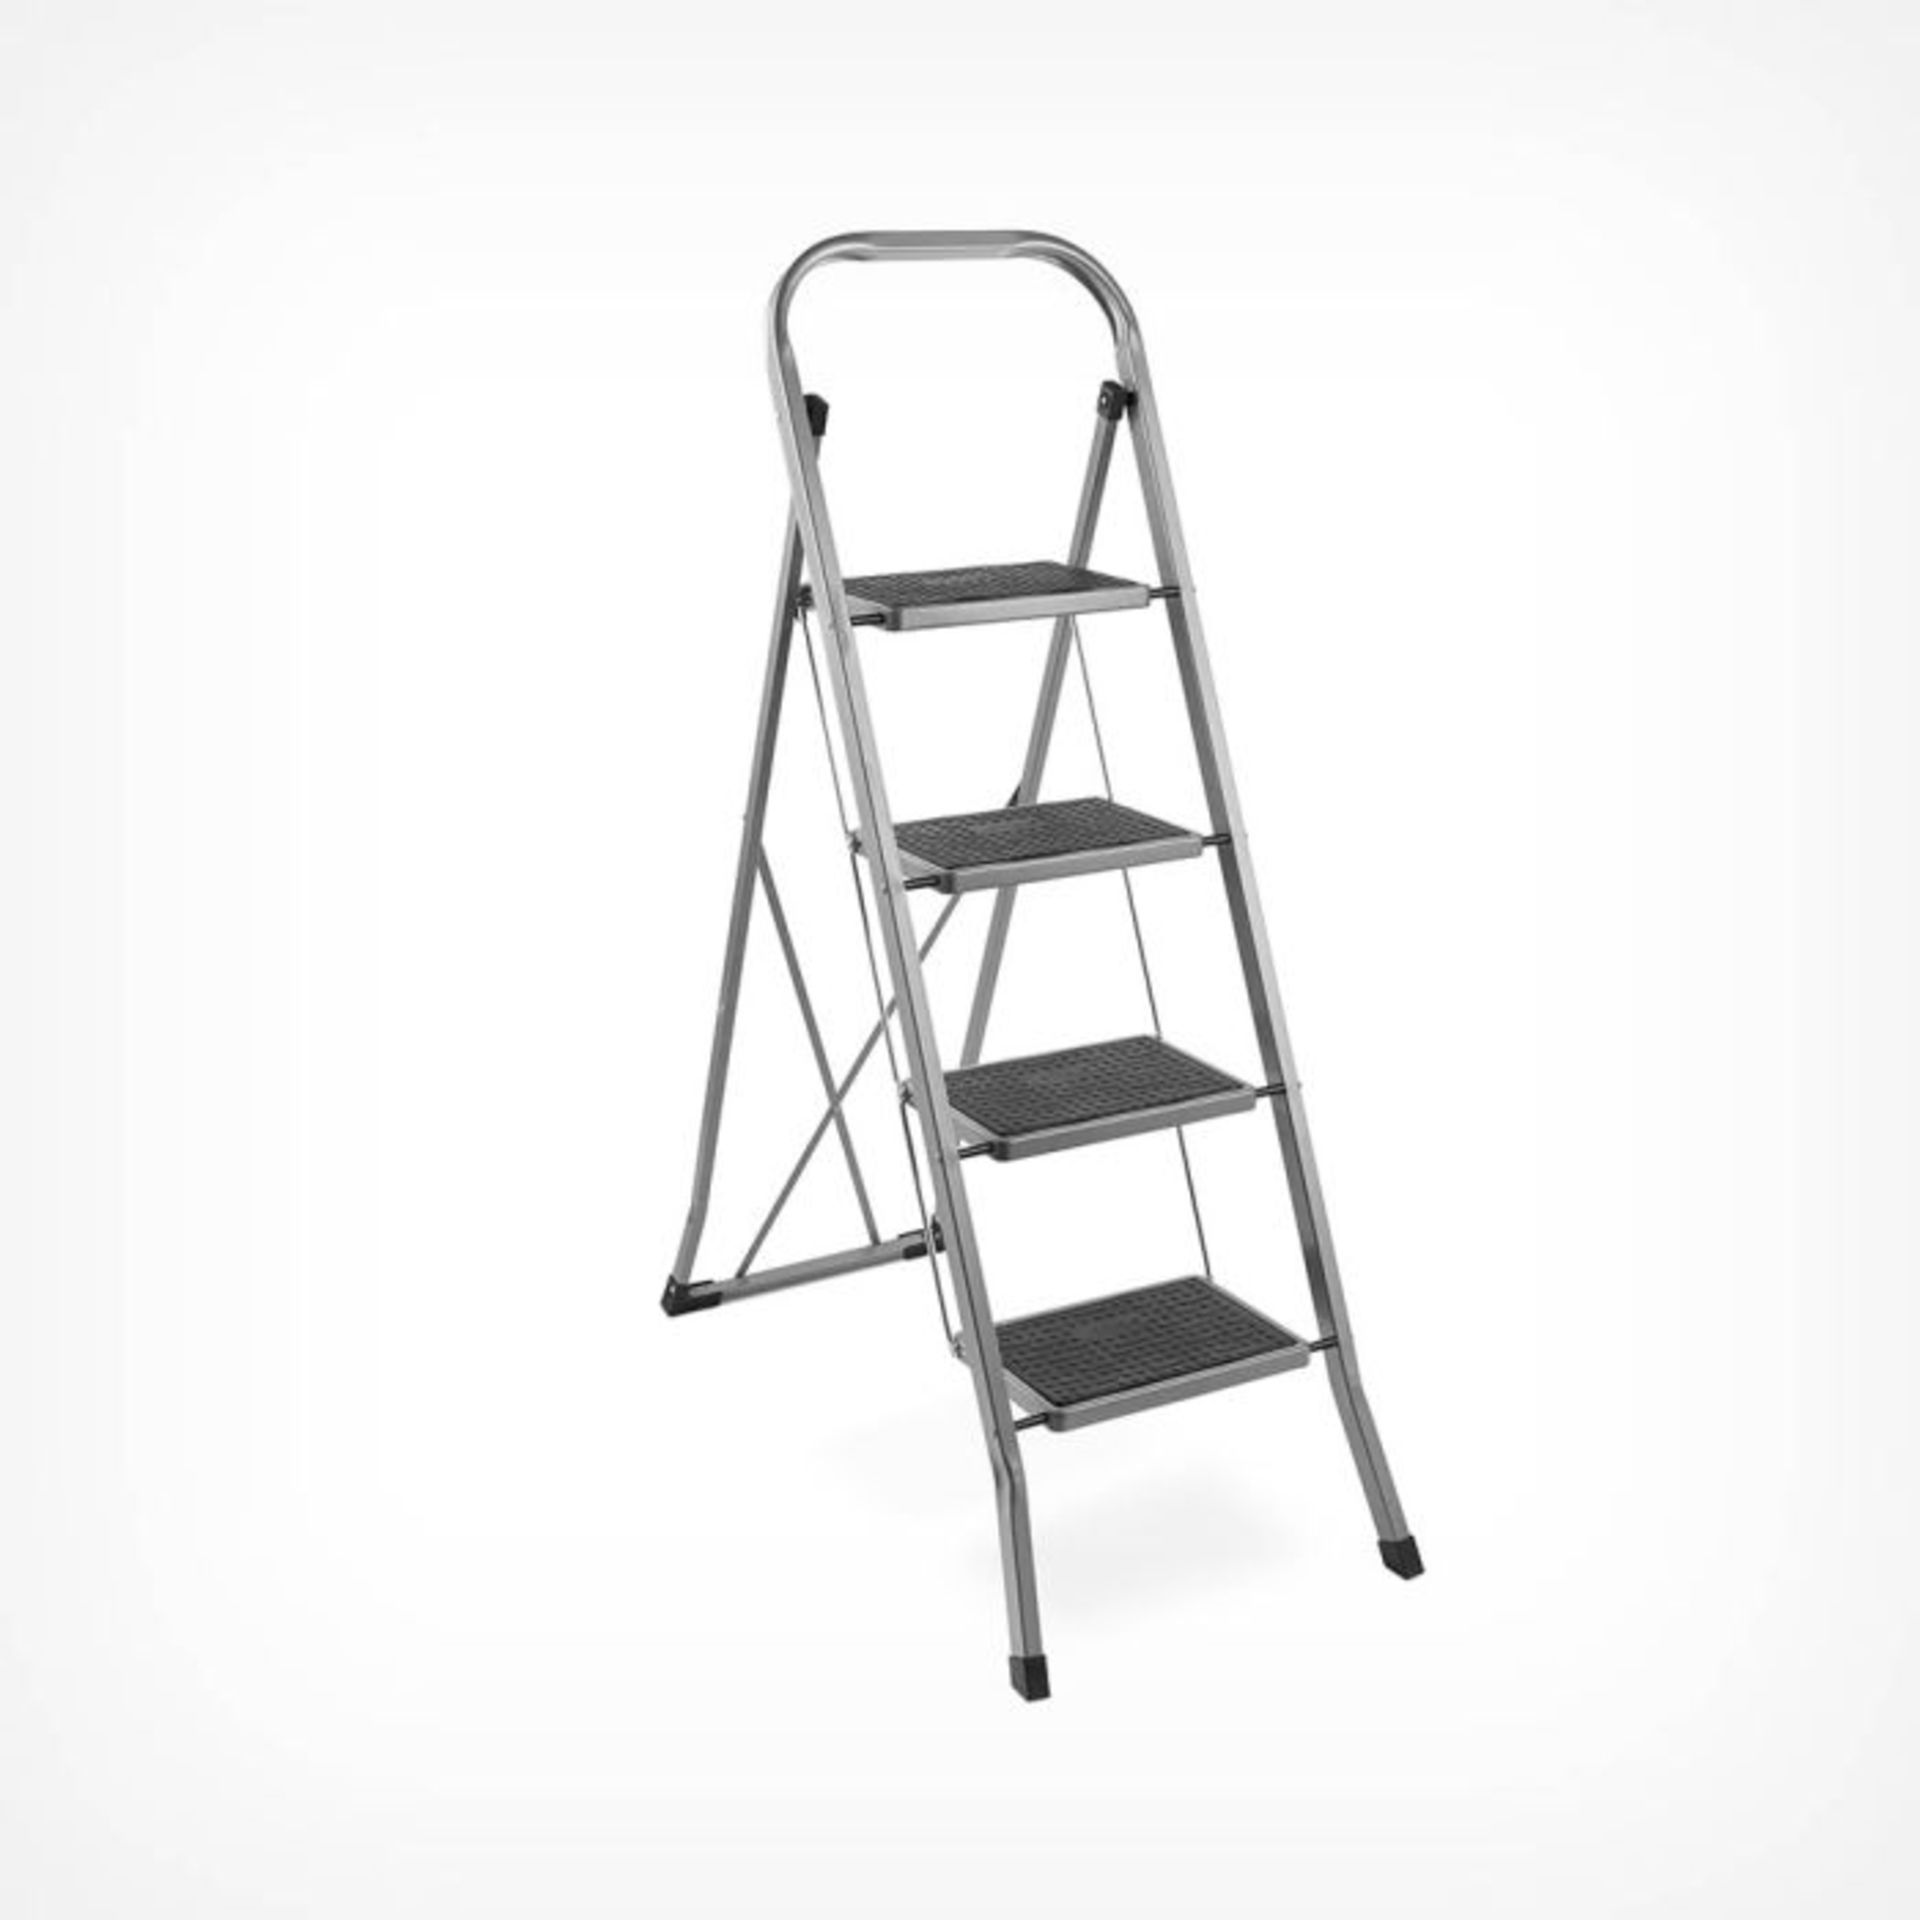 4 Step Steel Ladder. - ER33. Combining usability with durability, this step ladder is a perfect